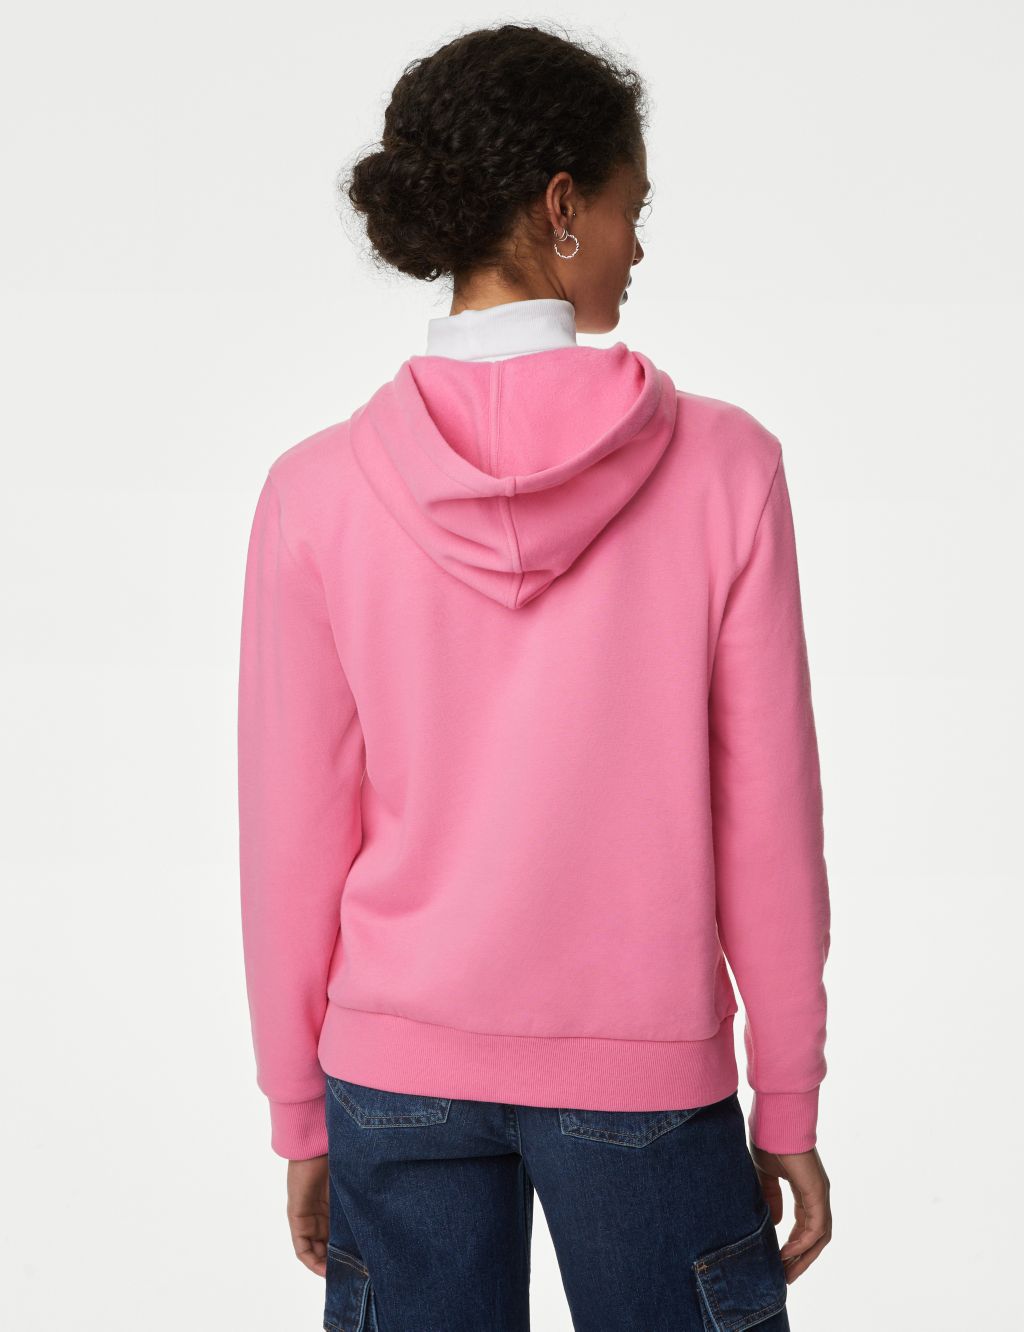 Cotton Rich Hoodie image 5